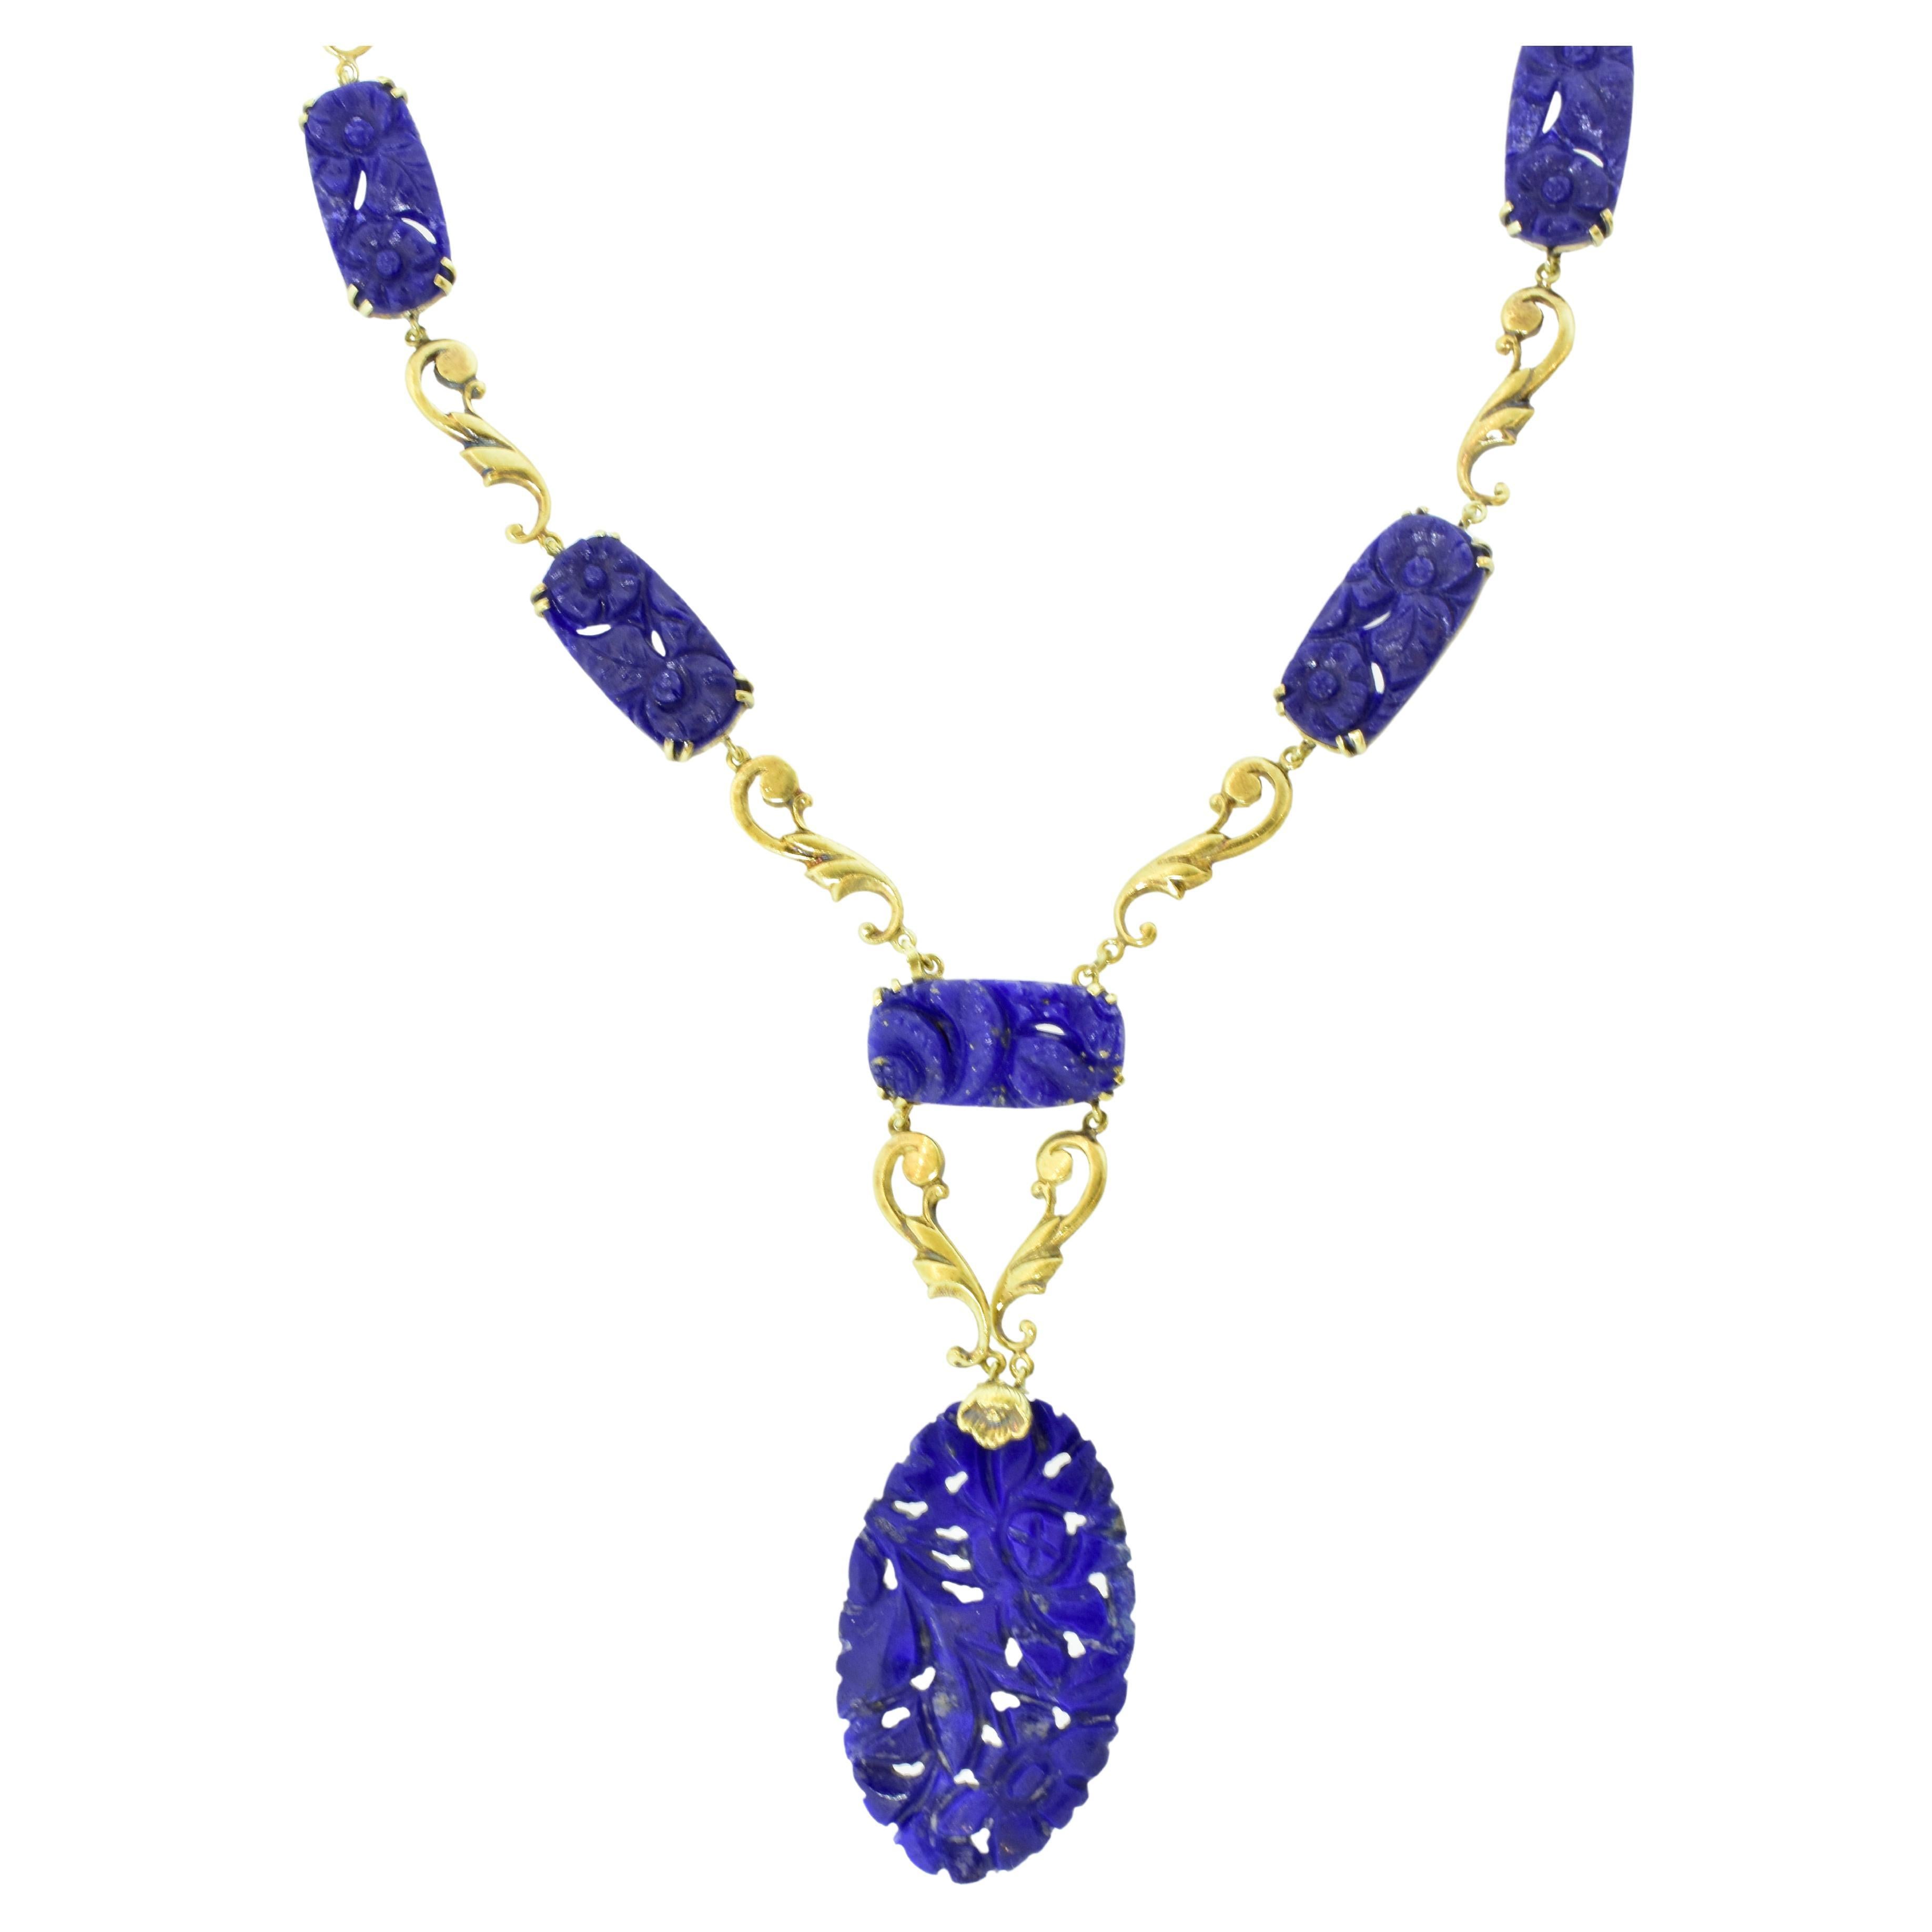 Antique necklace of finely carved and pierced  natural vivid blue lapis.  This handmade gold necklace is in total 17 inches long.  The pendant portion is 3 inches in length, and the necklace of punctuated early gold period scrolls and fine lapis